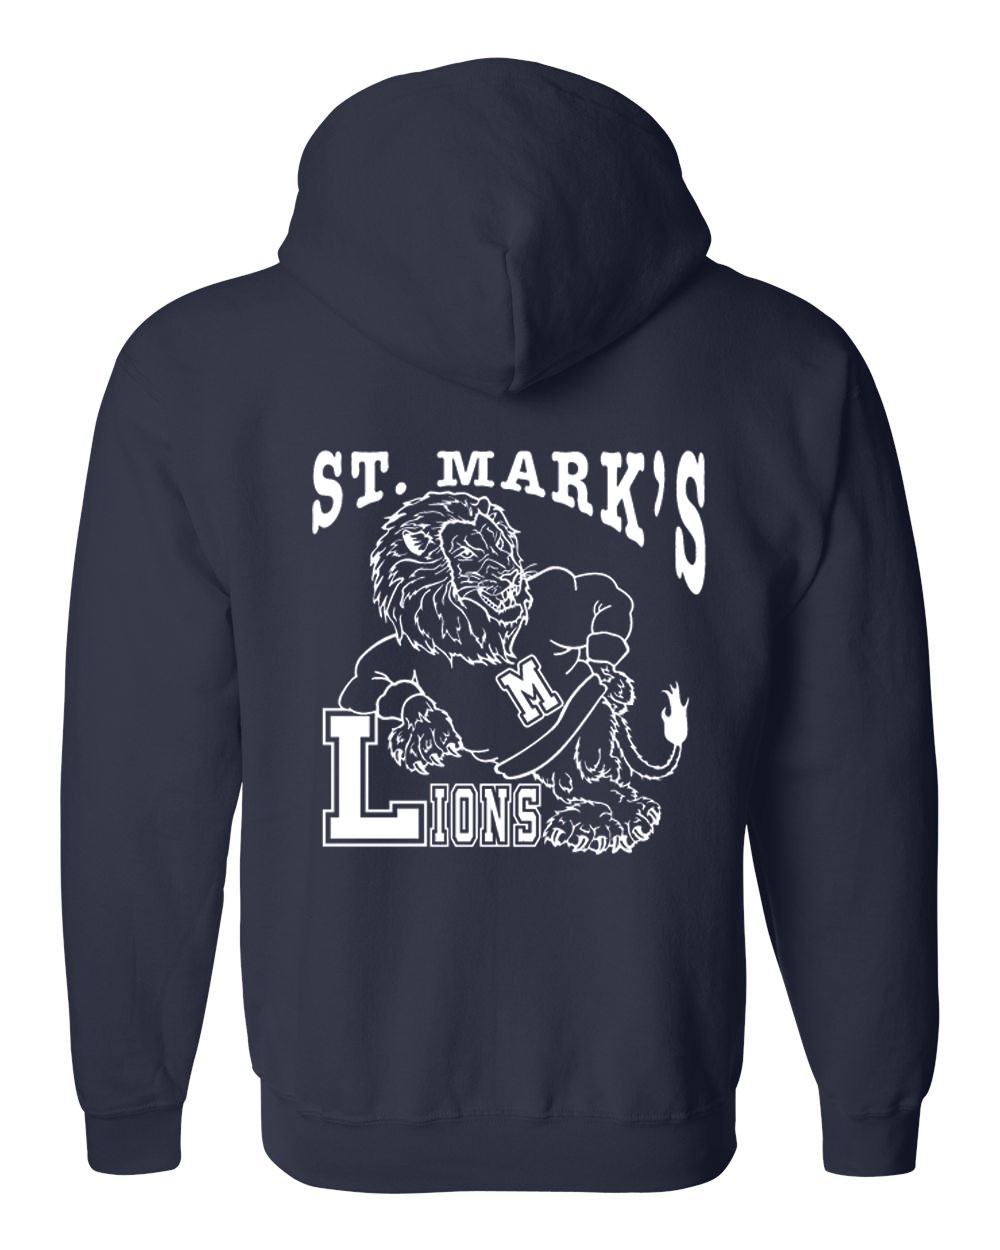 SMLS Staff Pullover Hoodie w/ St. Mark Lion Logo - Please Allow 2-3 Weeks for Delivery